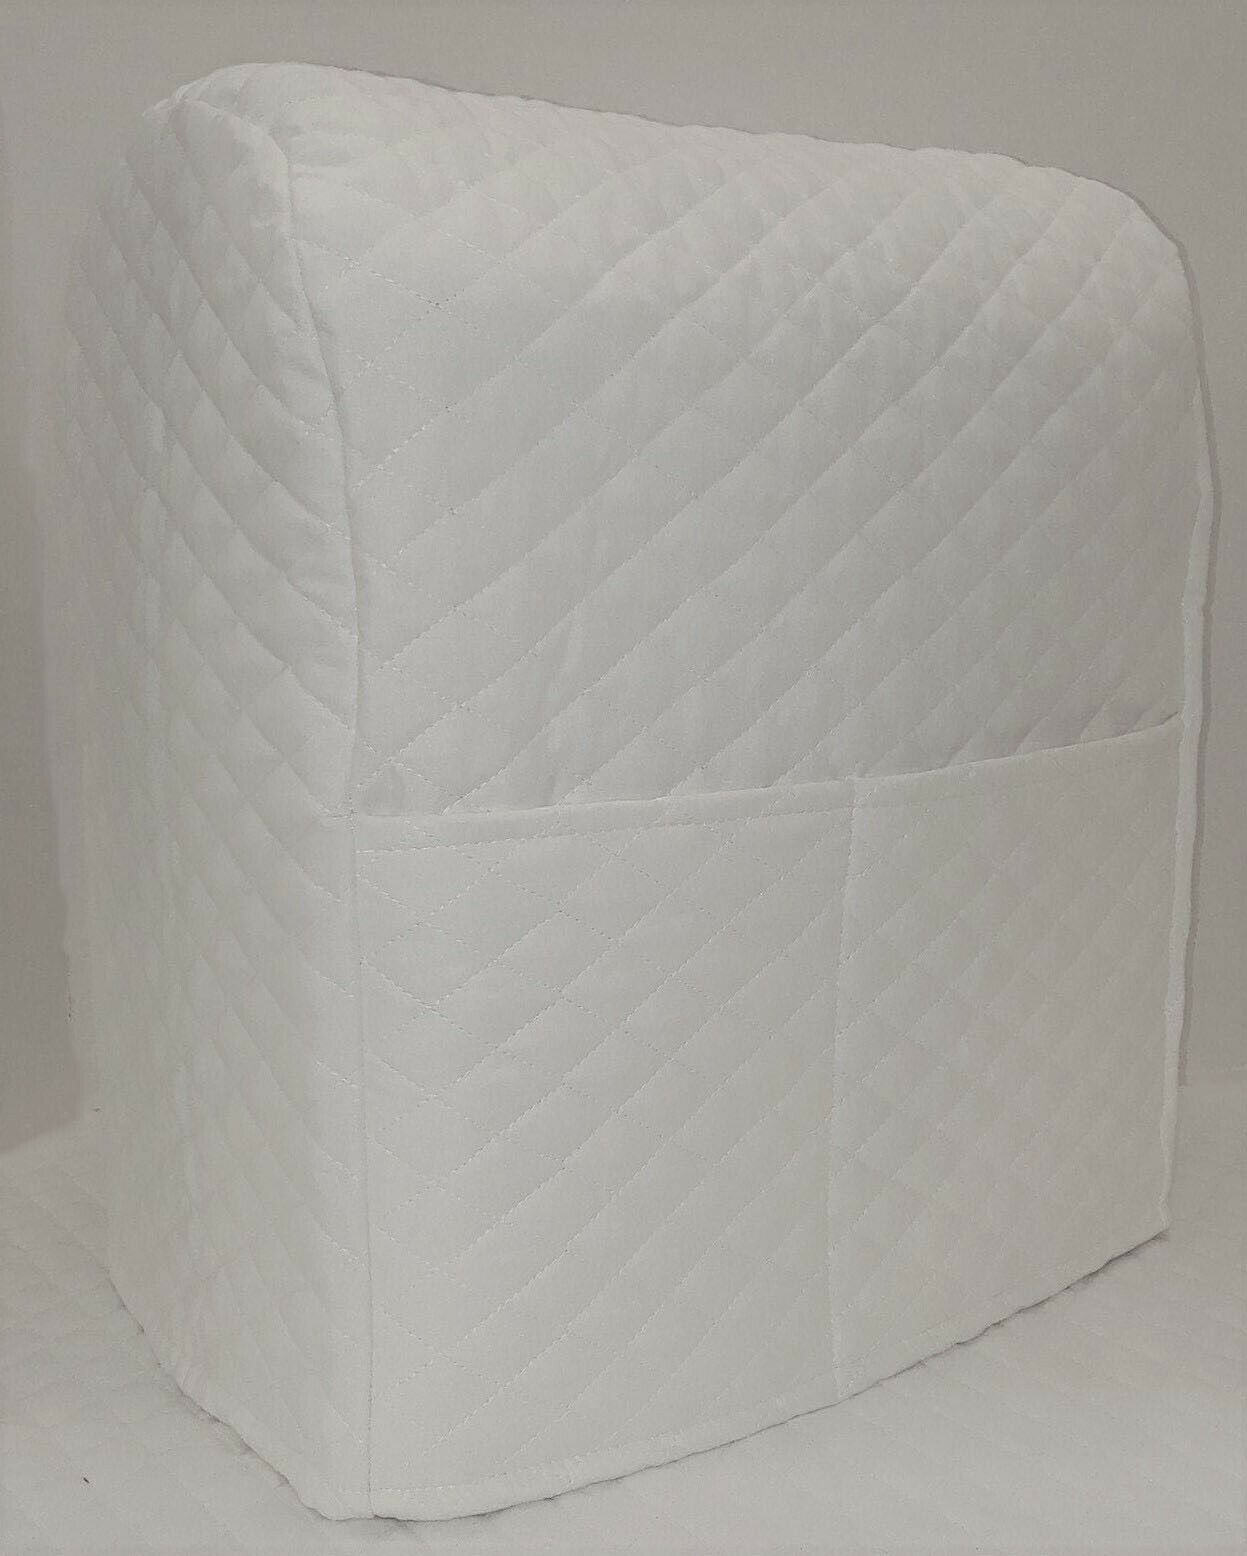 Quilted Cover Compatible with Kitchenaid Stand Mixer by Penny's Needful Things (White, 4.5/5qt Tilt Head)